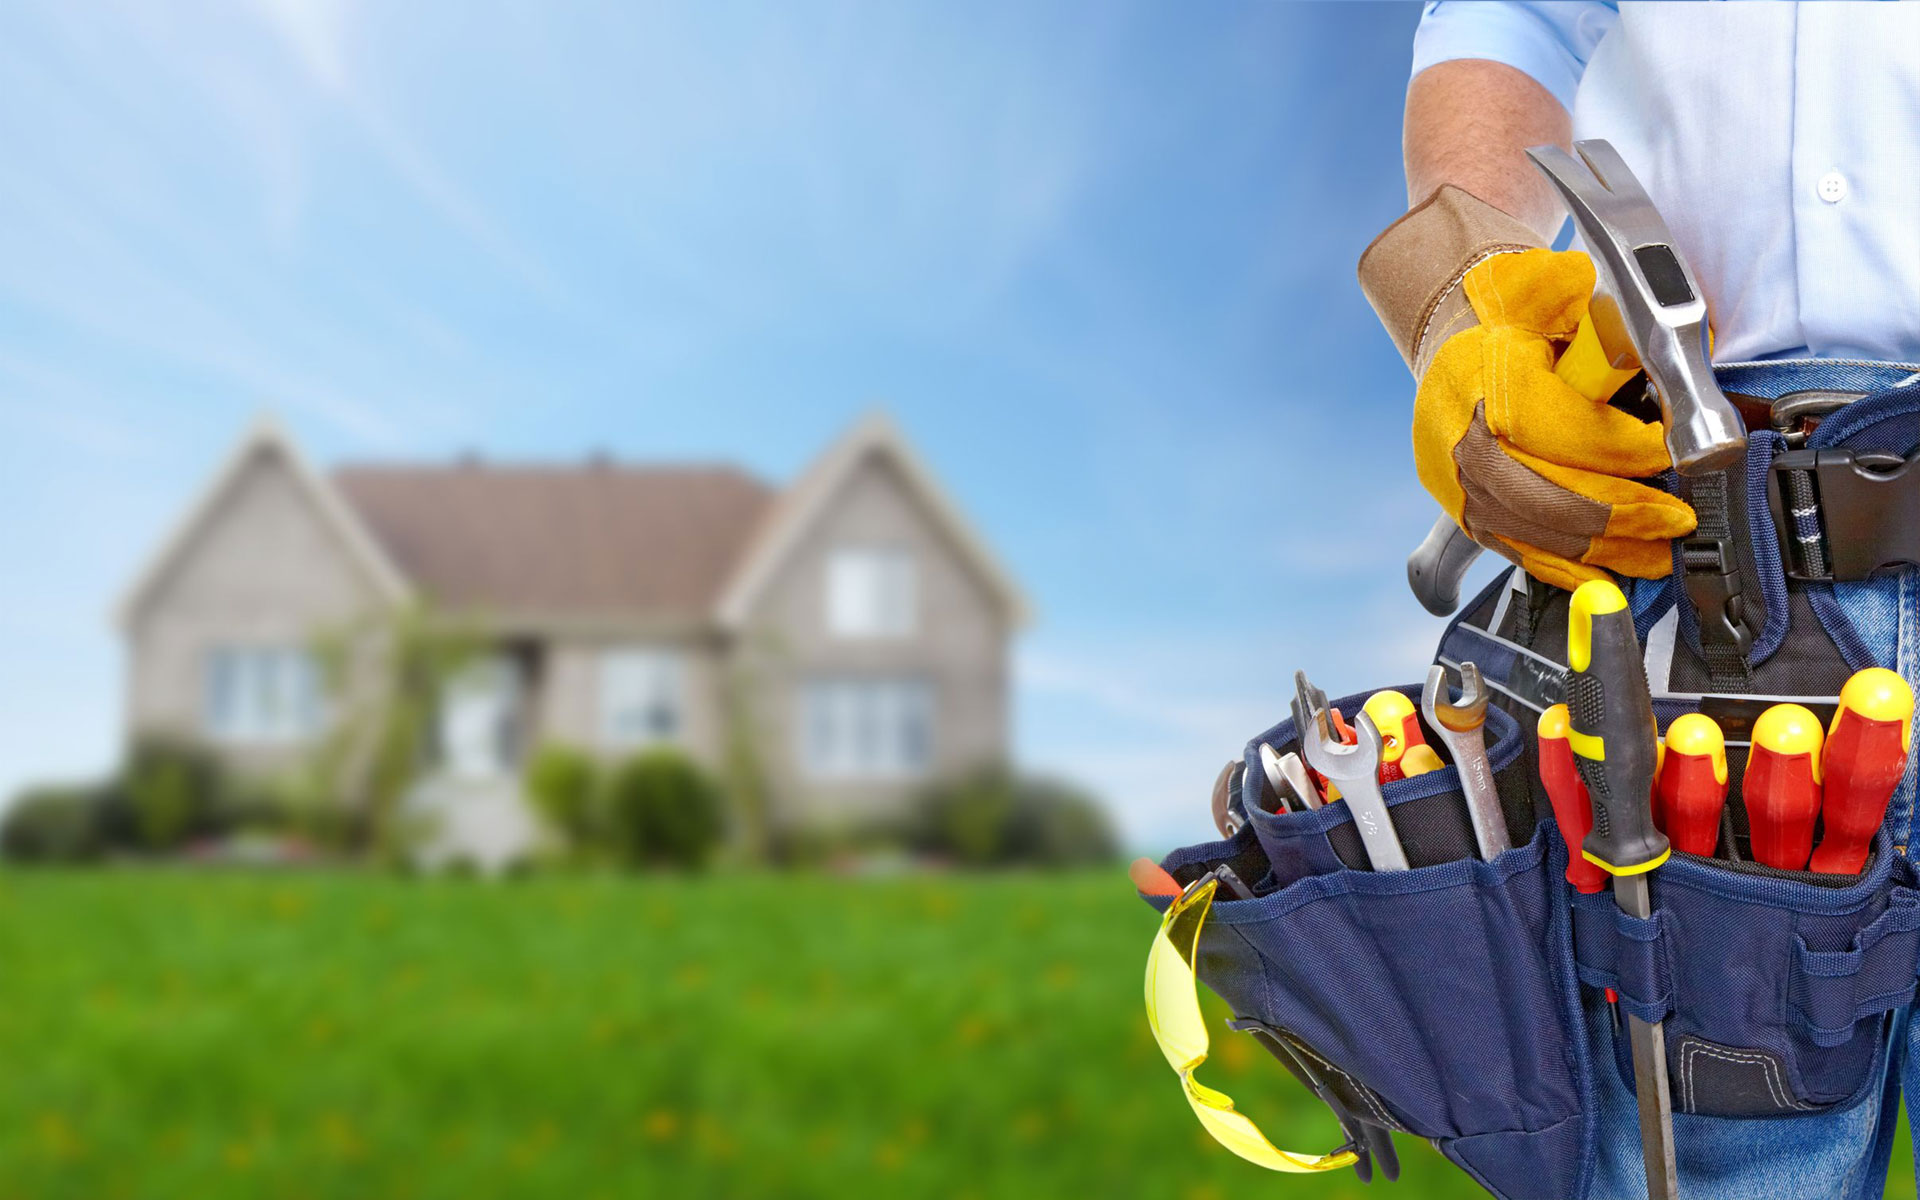 Rehabbing a Home? Be Ready for These 5 Costs